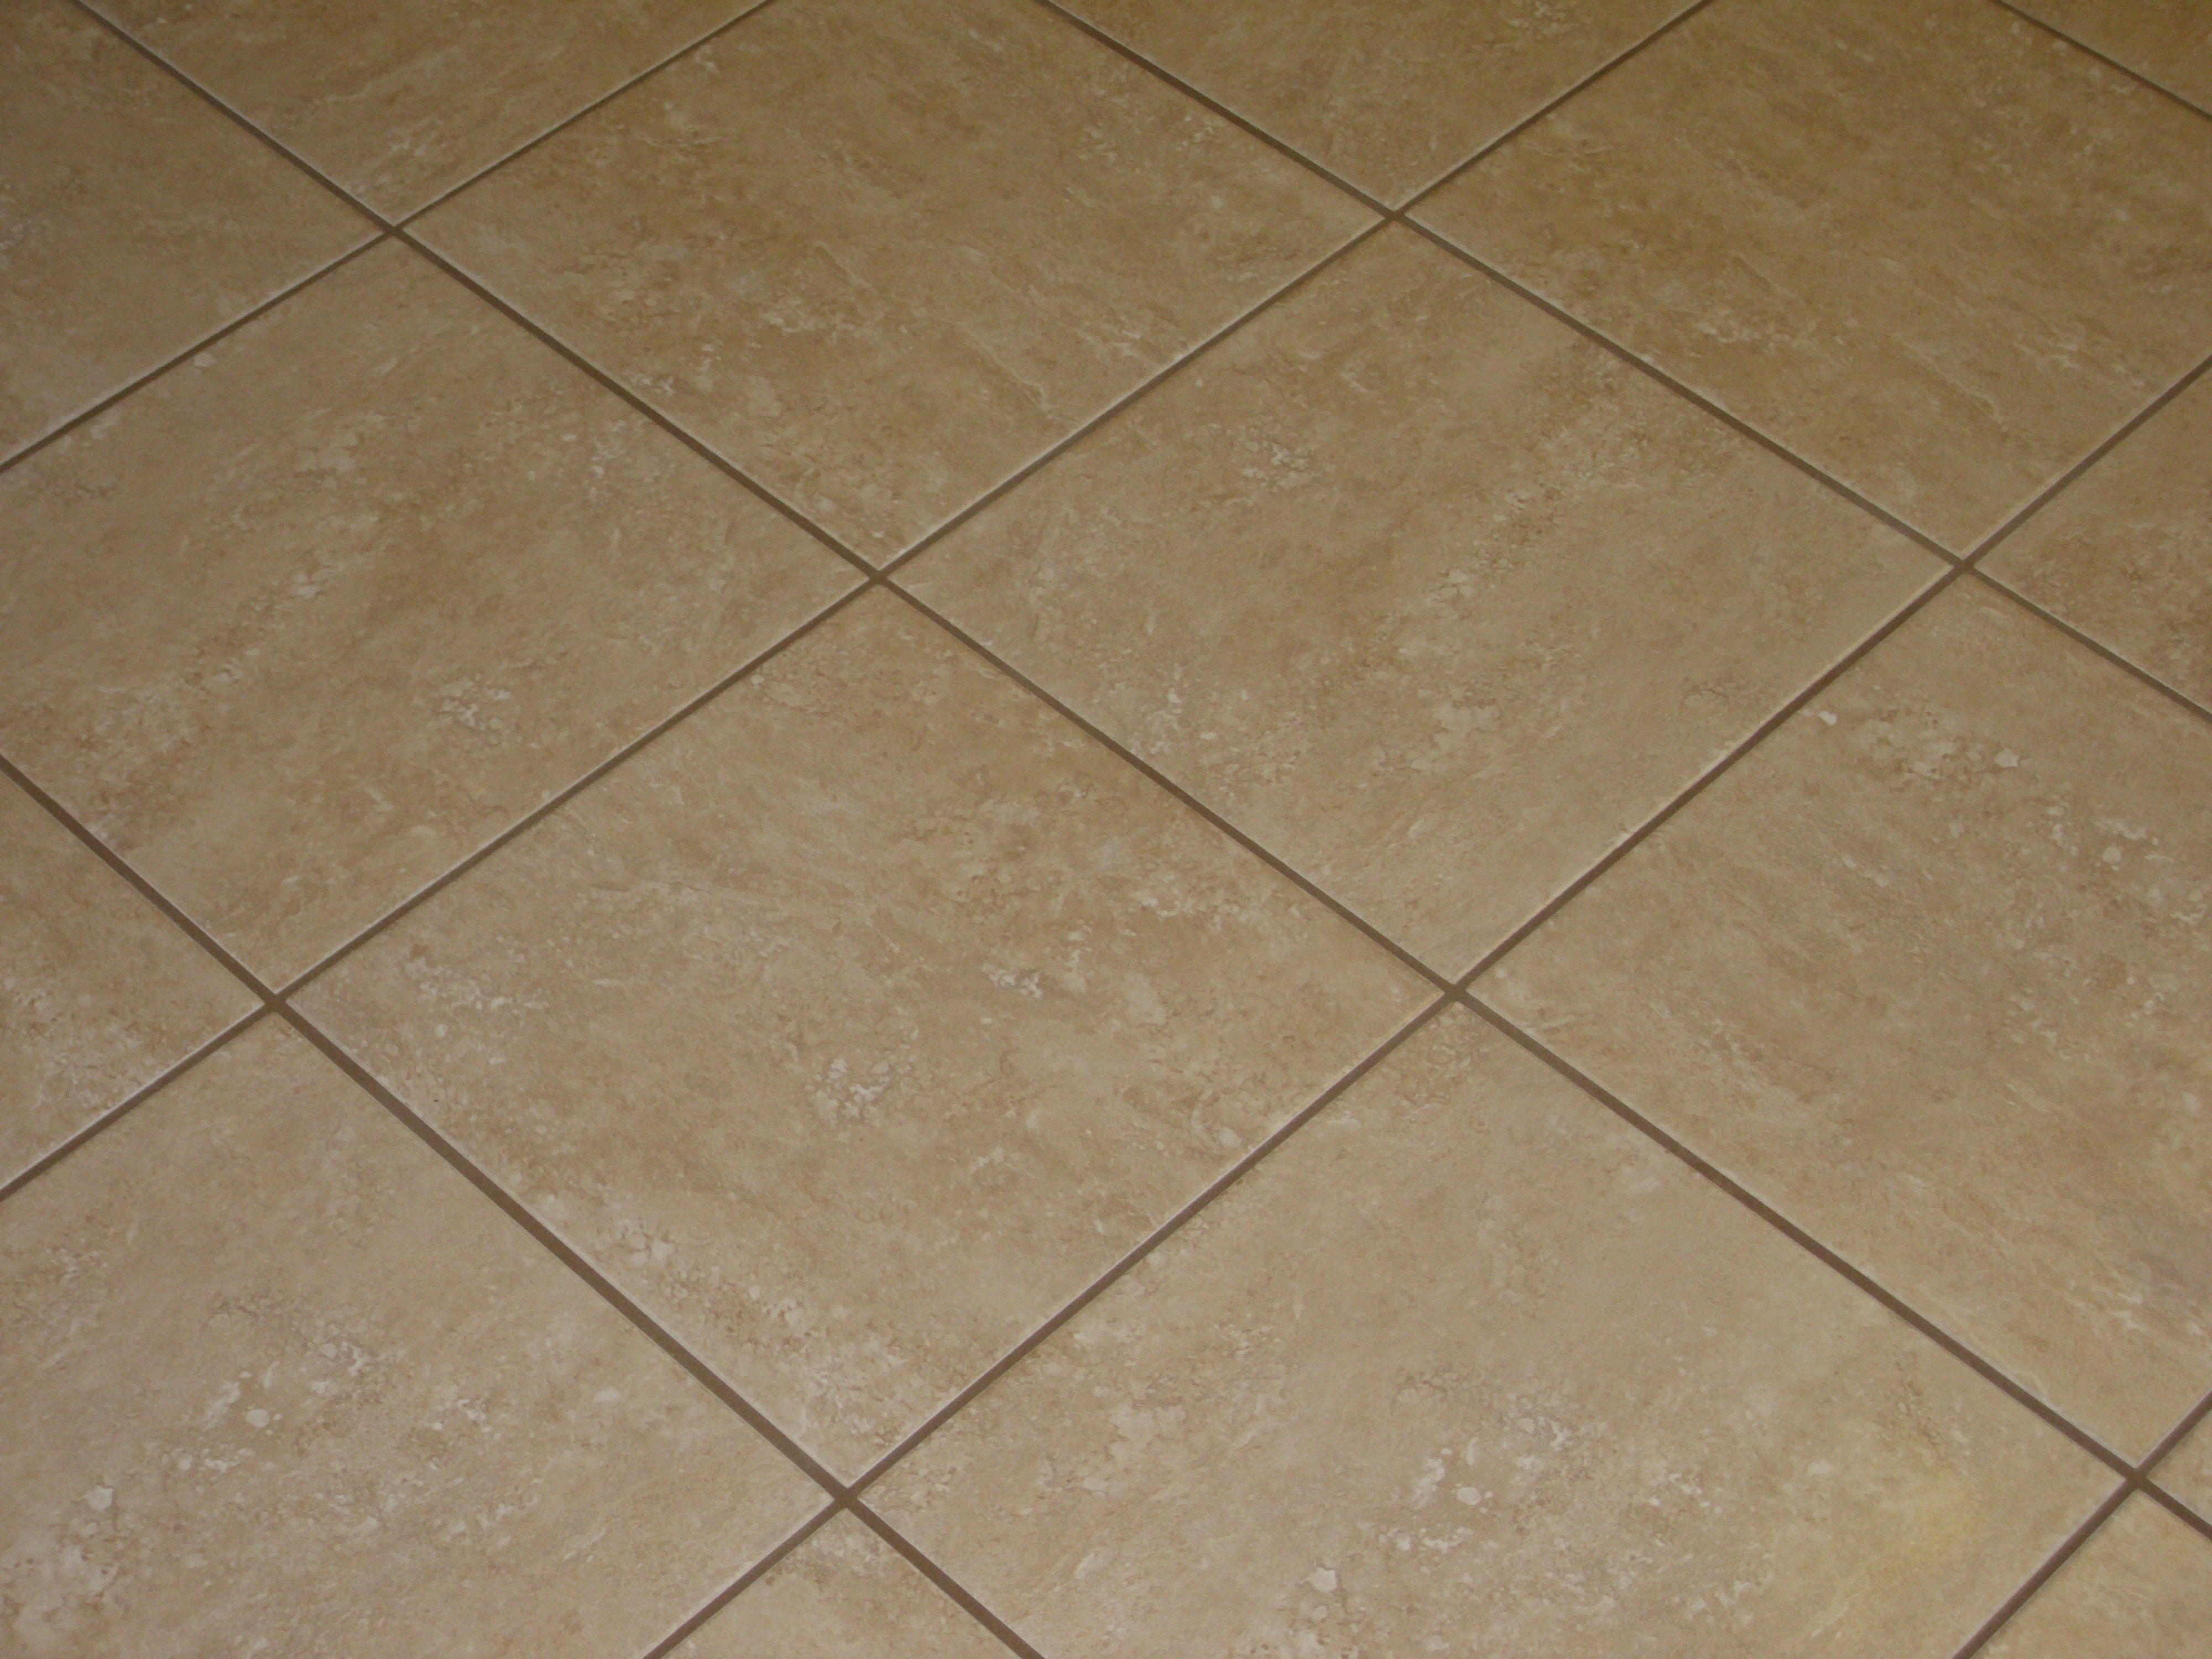 Tile Grout – To Seal or Not to Seal?